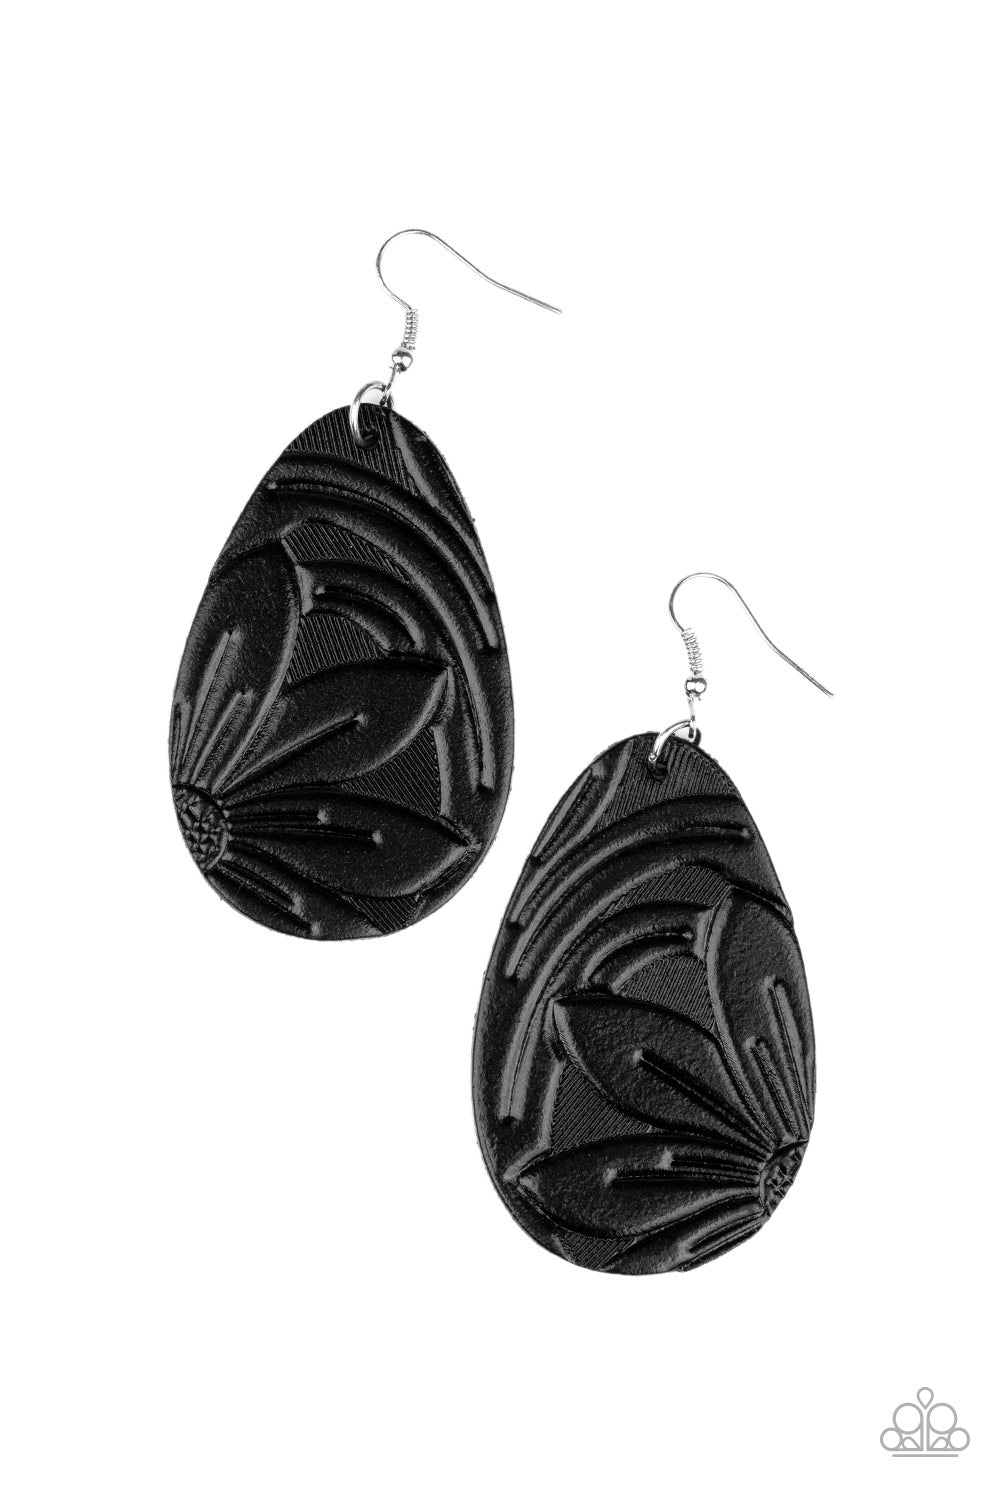 ** 398 Garden Therapy - Black Earrings Paparazzi Accessories